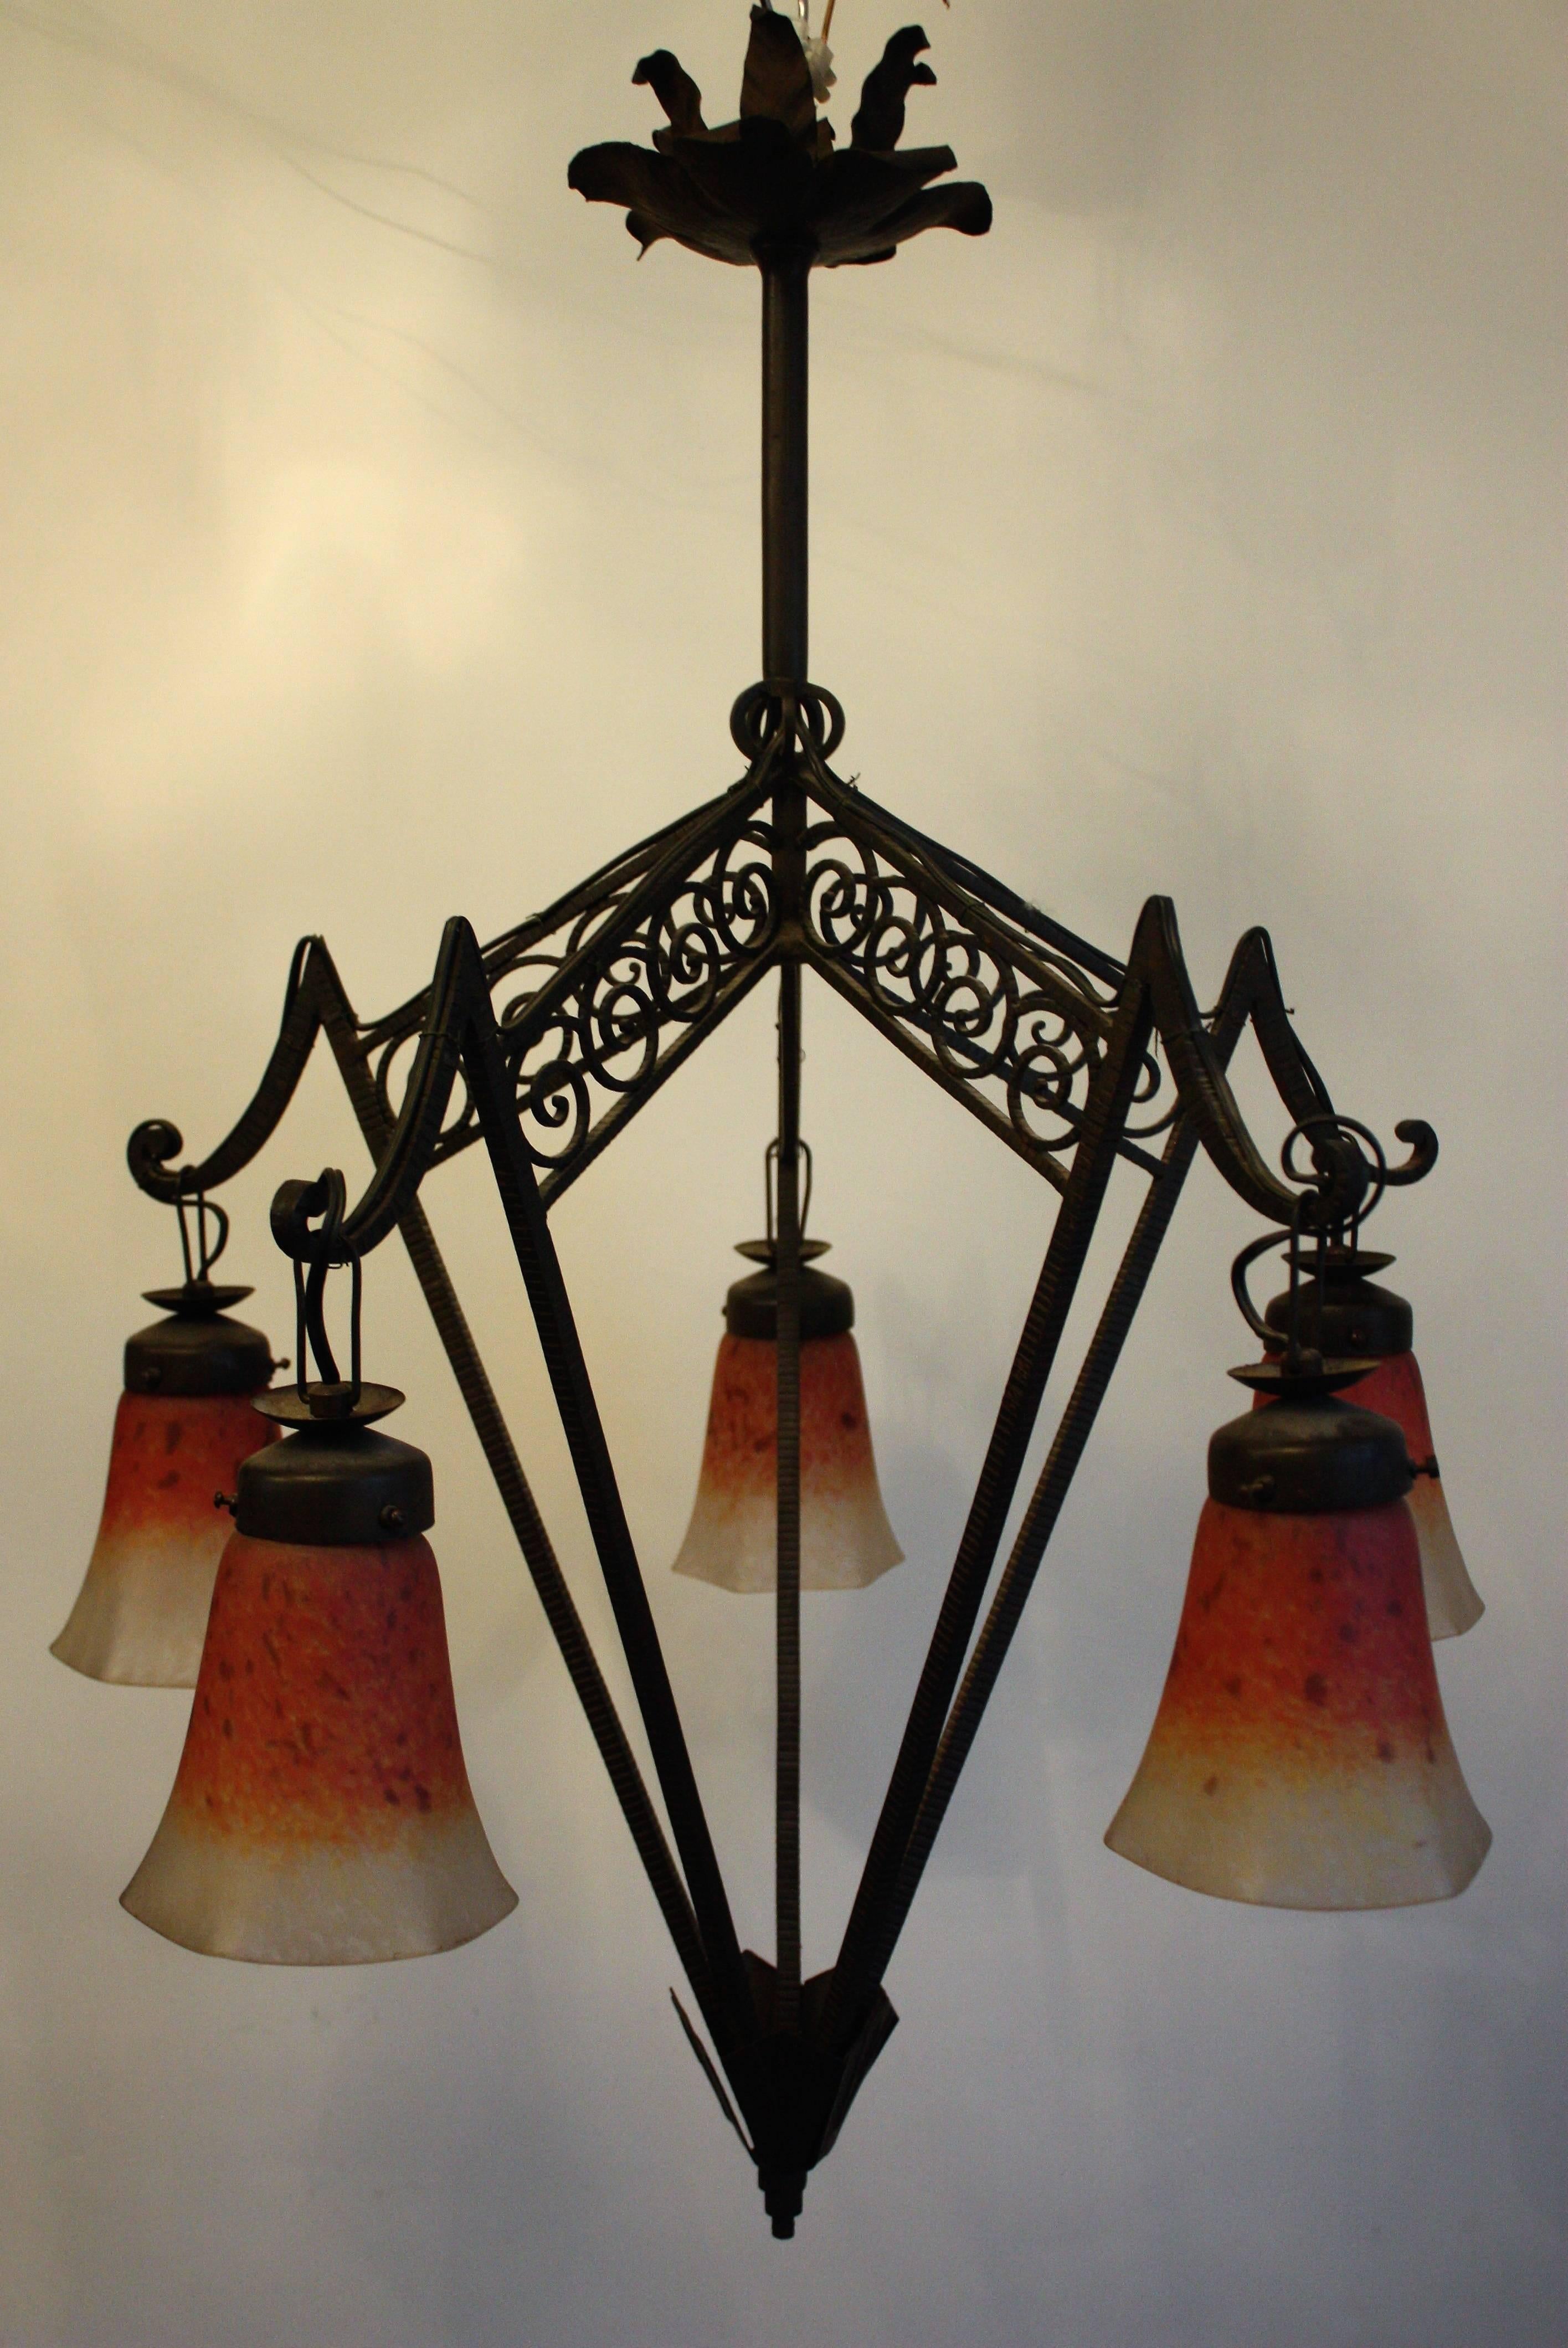 Early 20th Century French Art Deco Wrought Iron and Glass Chandelier, circa 1925